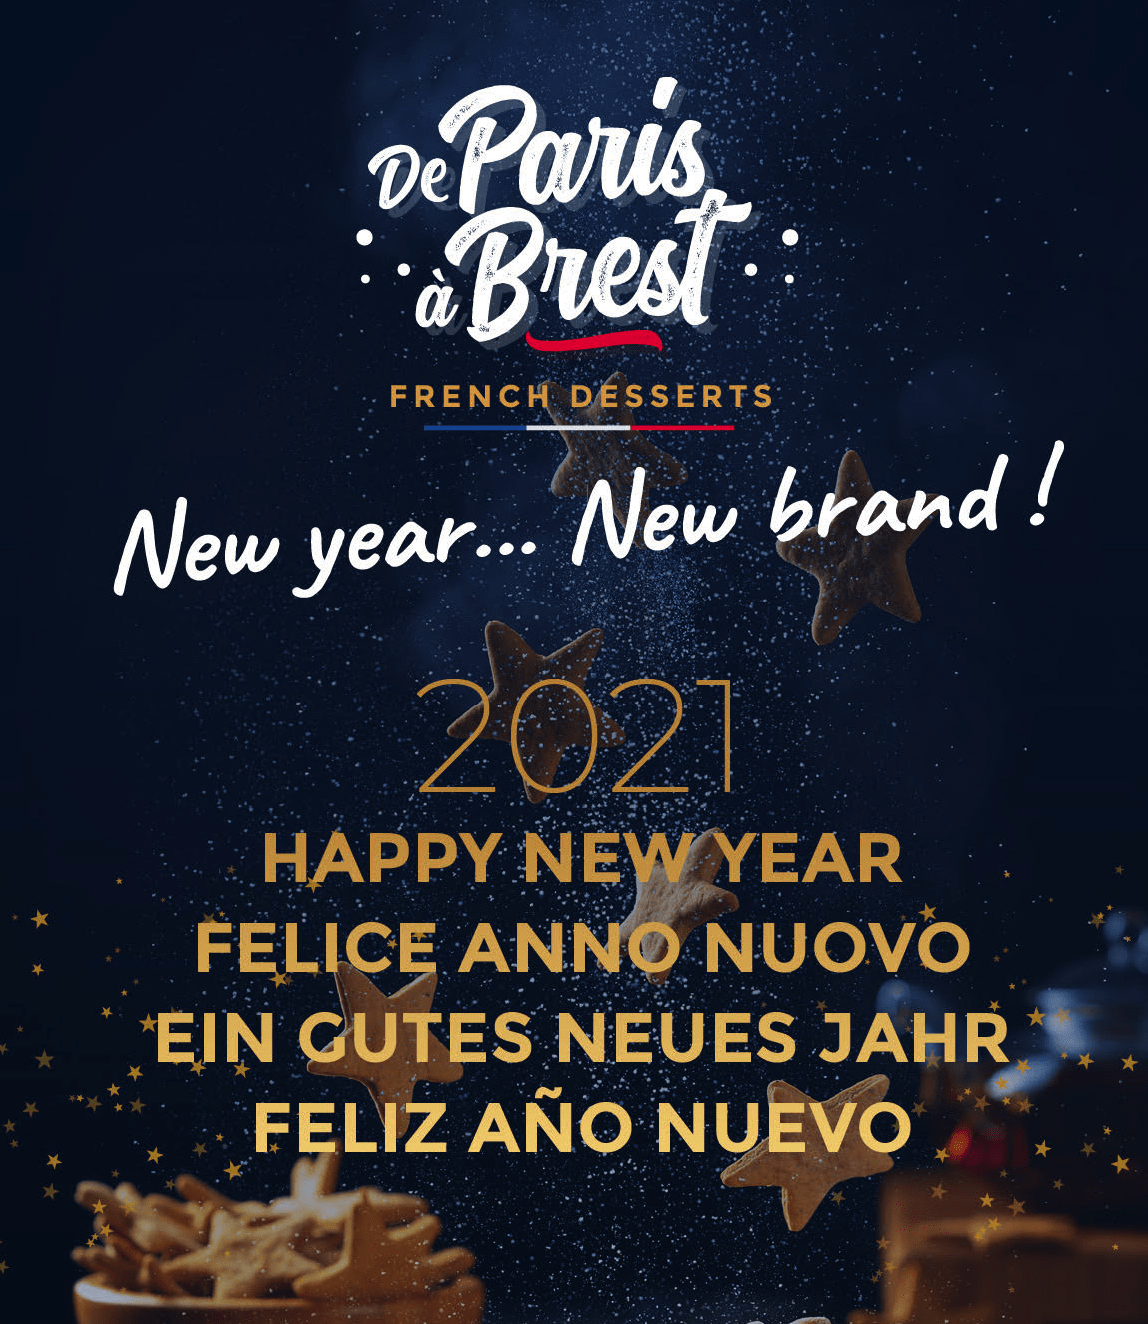 2021, De Paris à Brest is ready to offer our delicious products to the world !